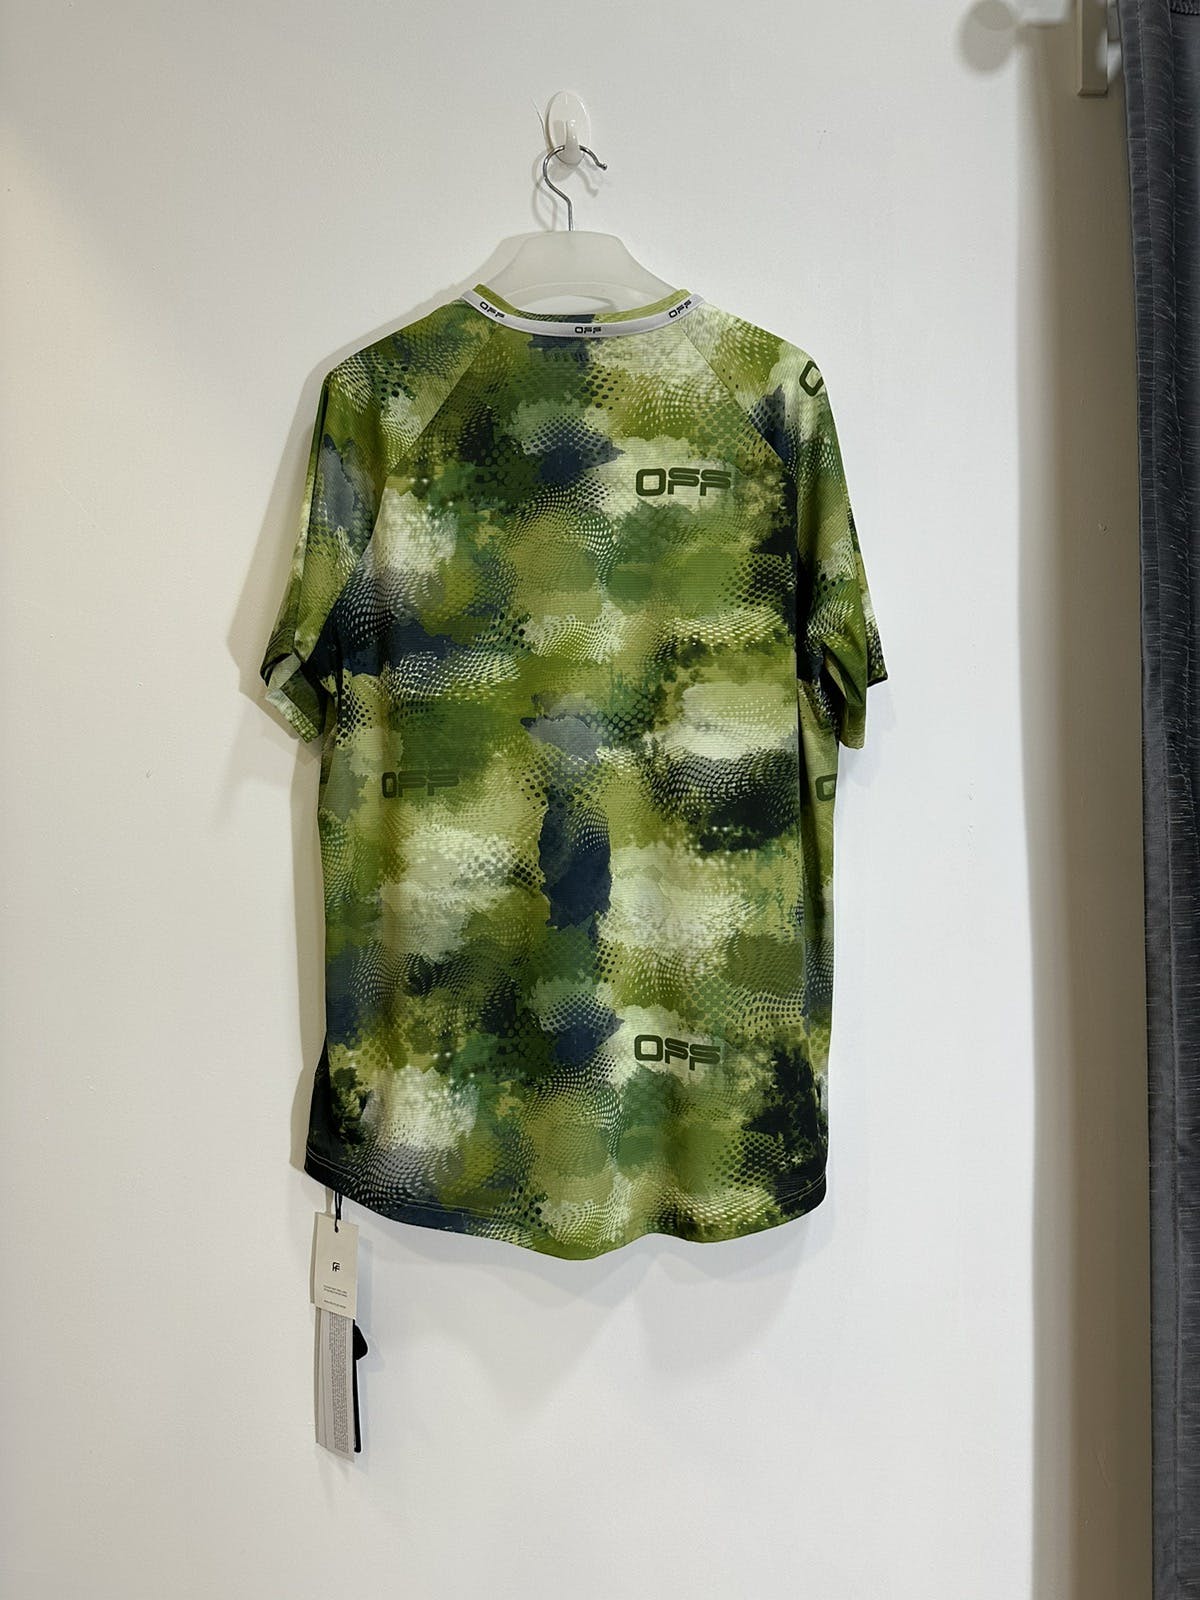 Off White Active Camo Print Jersey - 7